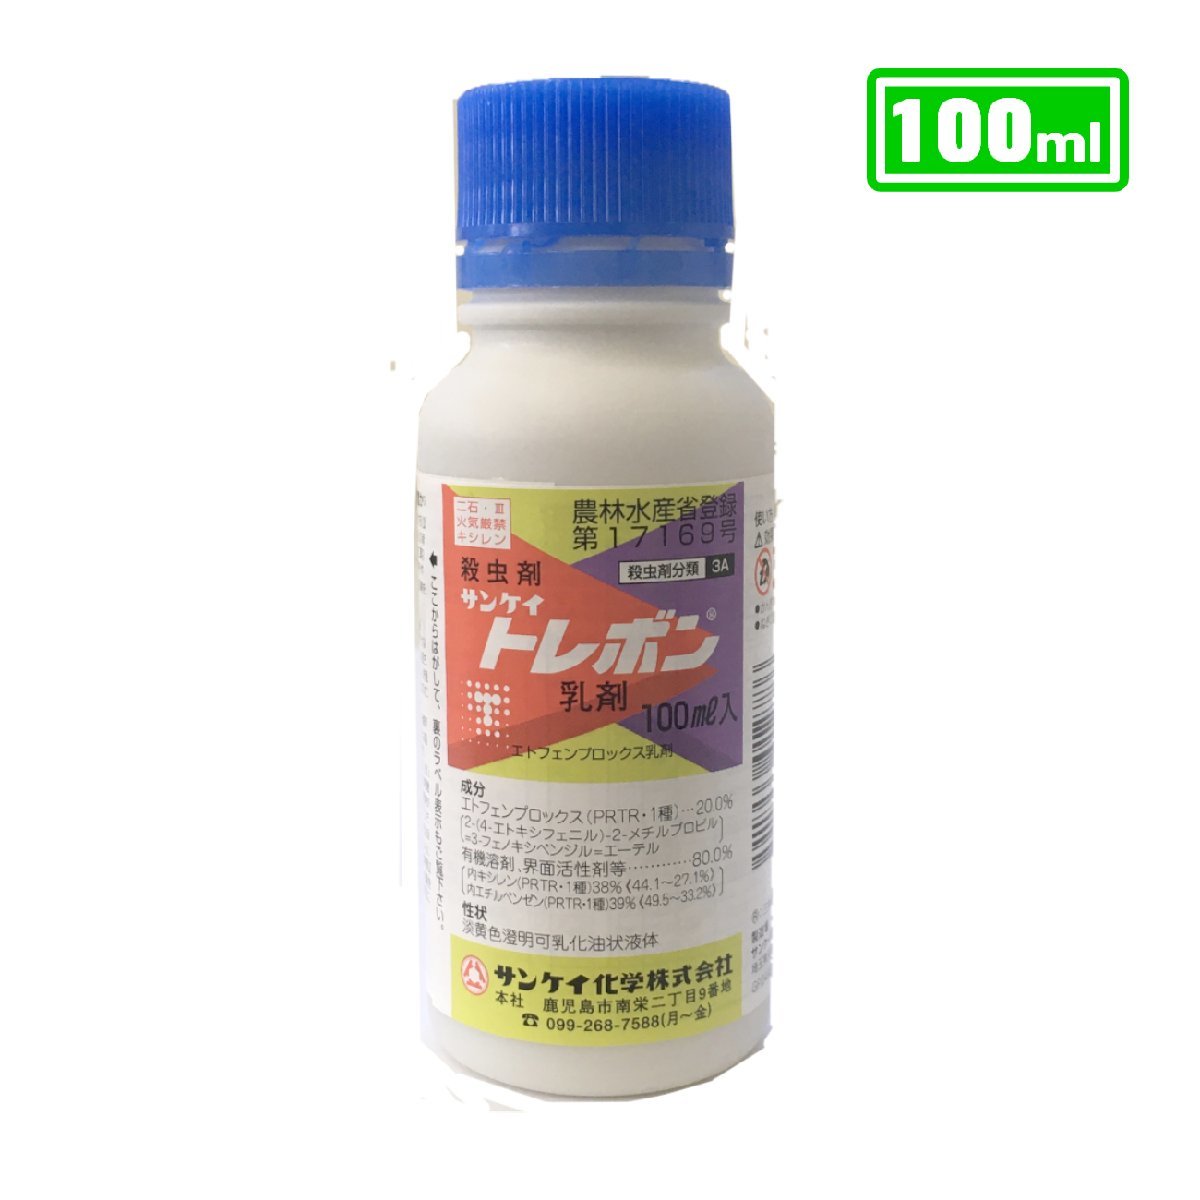  turtle msiunkaawanomeiga insecticide to Revo n..100ml